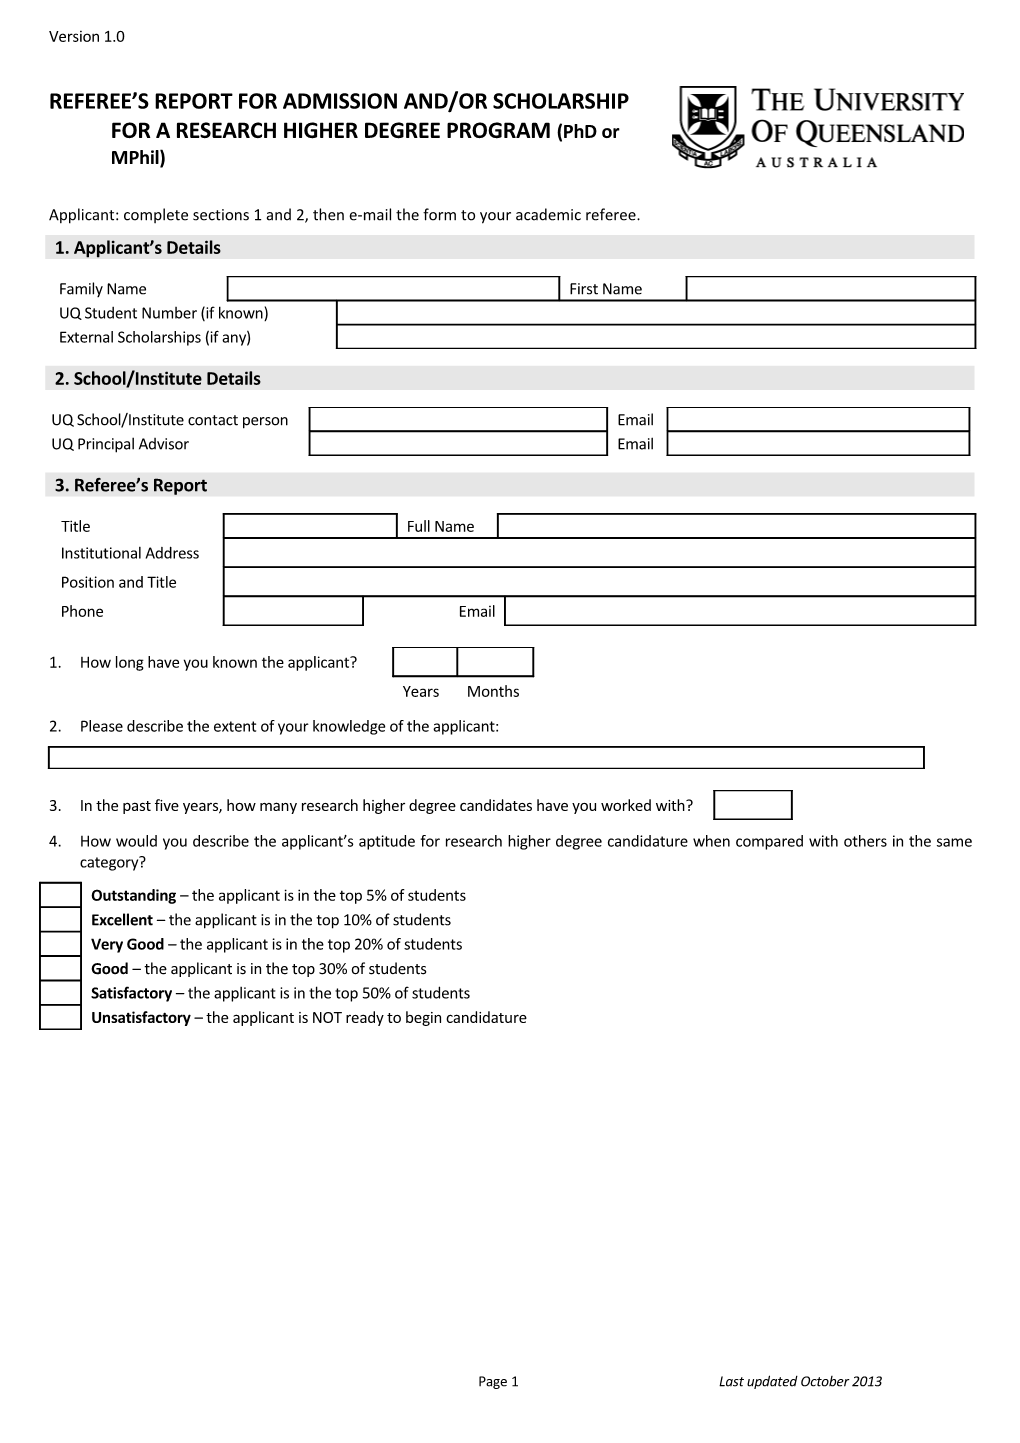 Application for Admission to Candidature